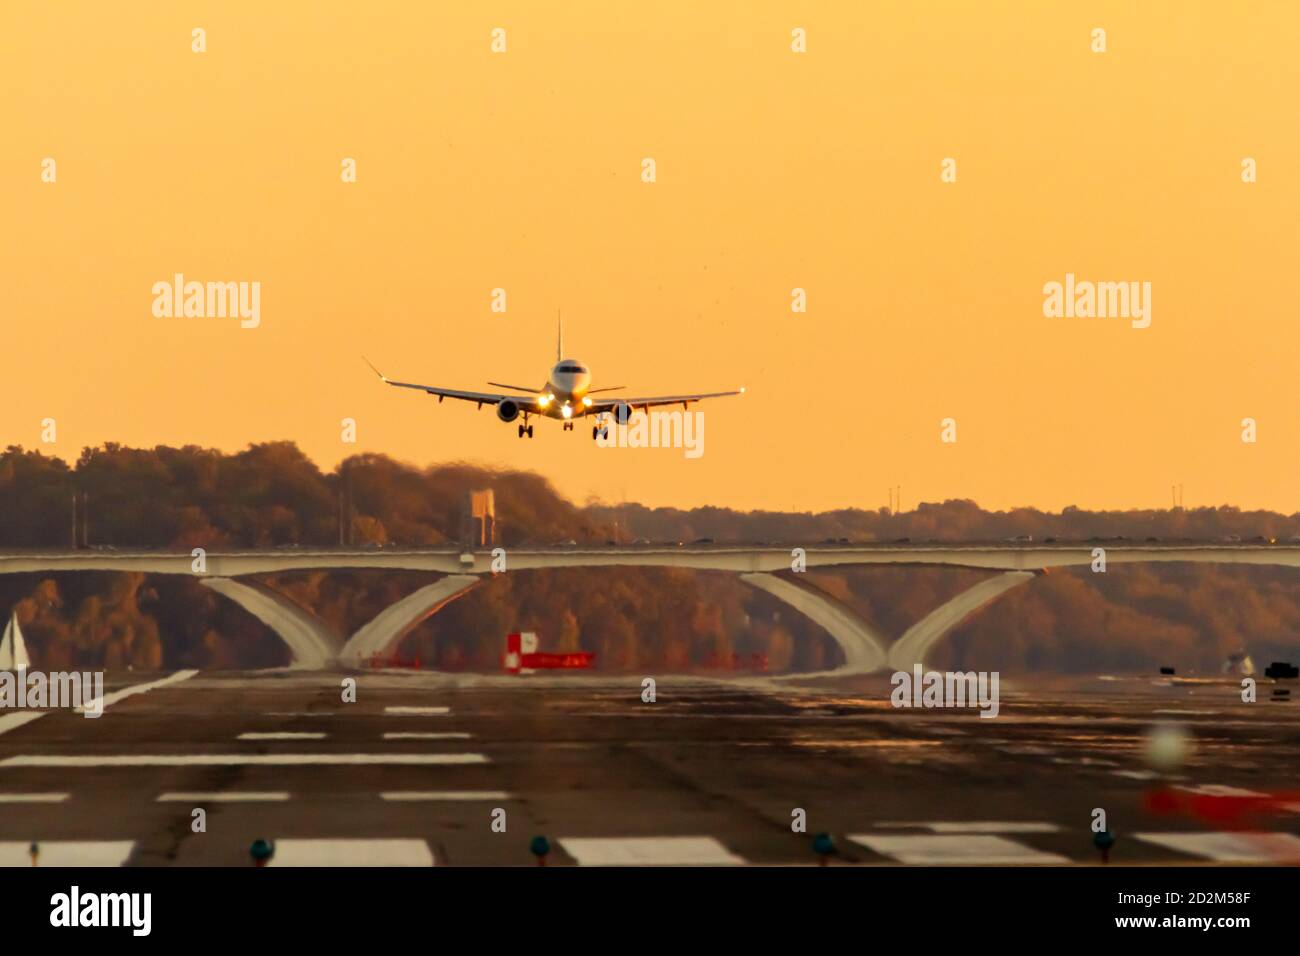 A passenger airline is slowly descending to land on a runway at sunset. The lights of the plane are on and wheels are down. There is scenic sunset sky Stock Photo